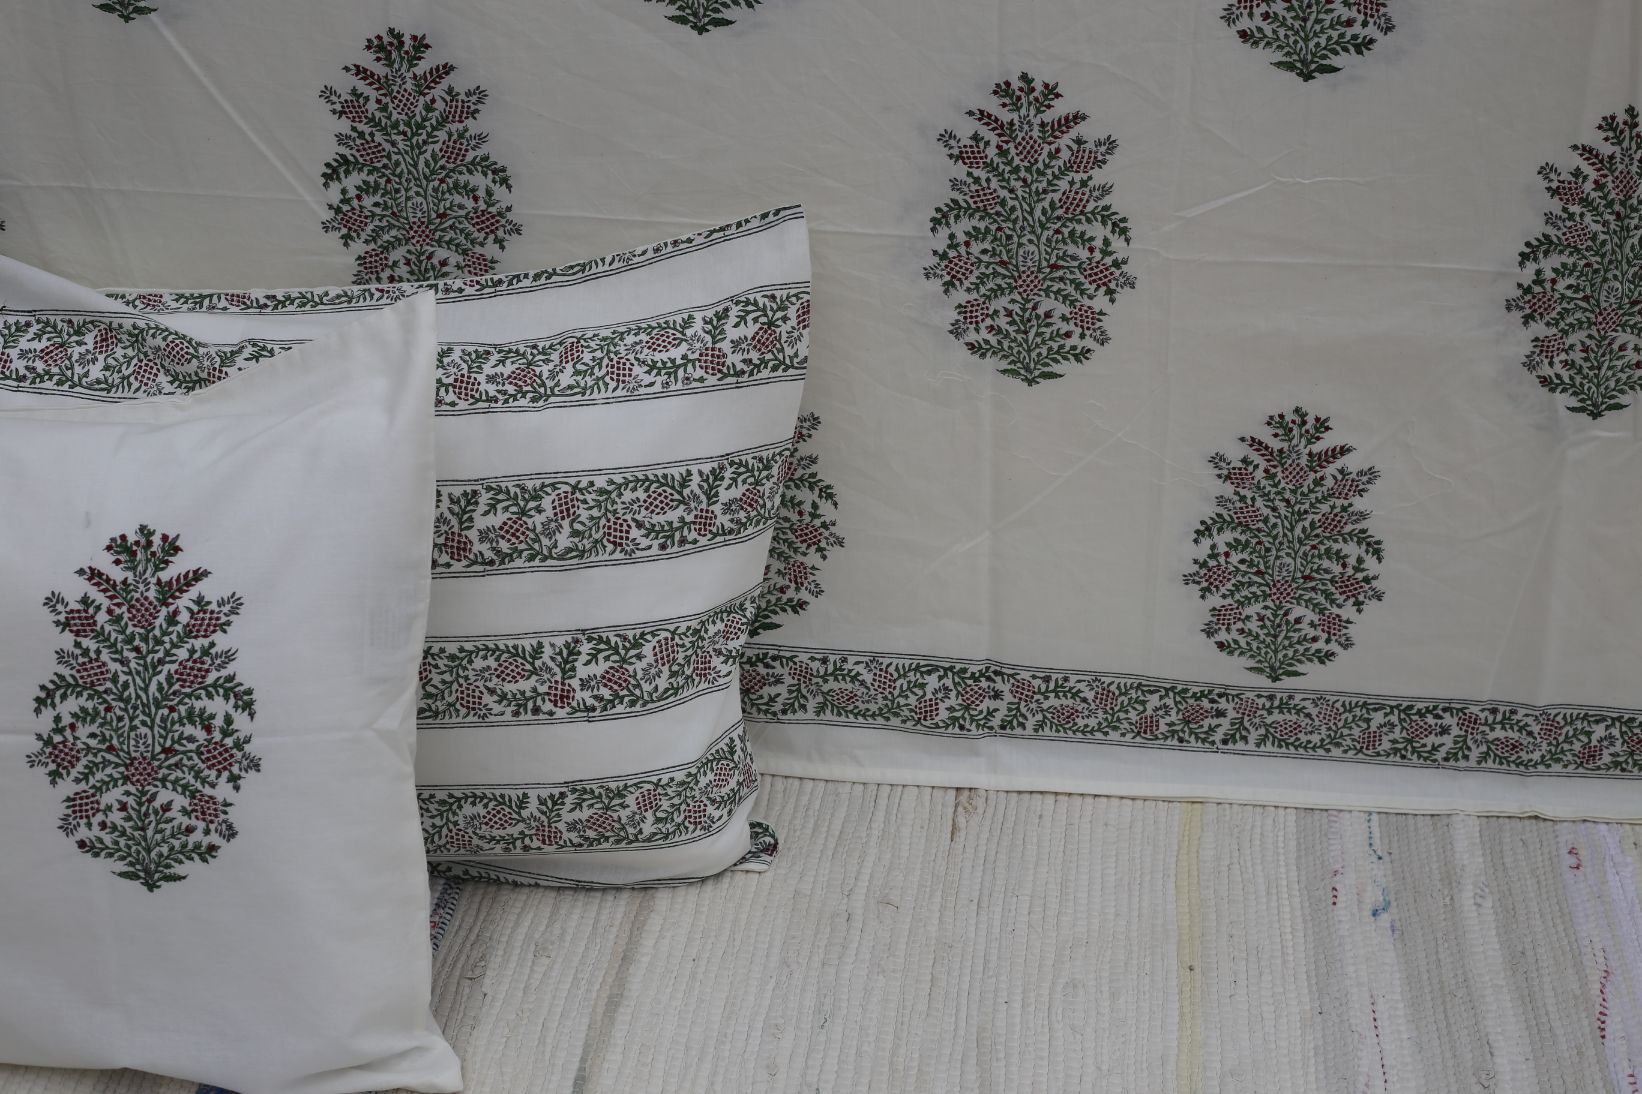 Block Printed Bedcovers for a Stylish and Cozy Home